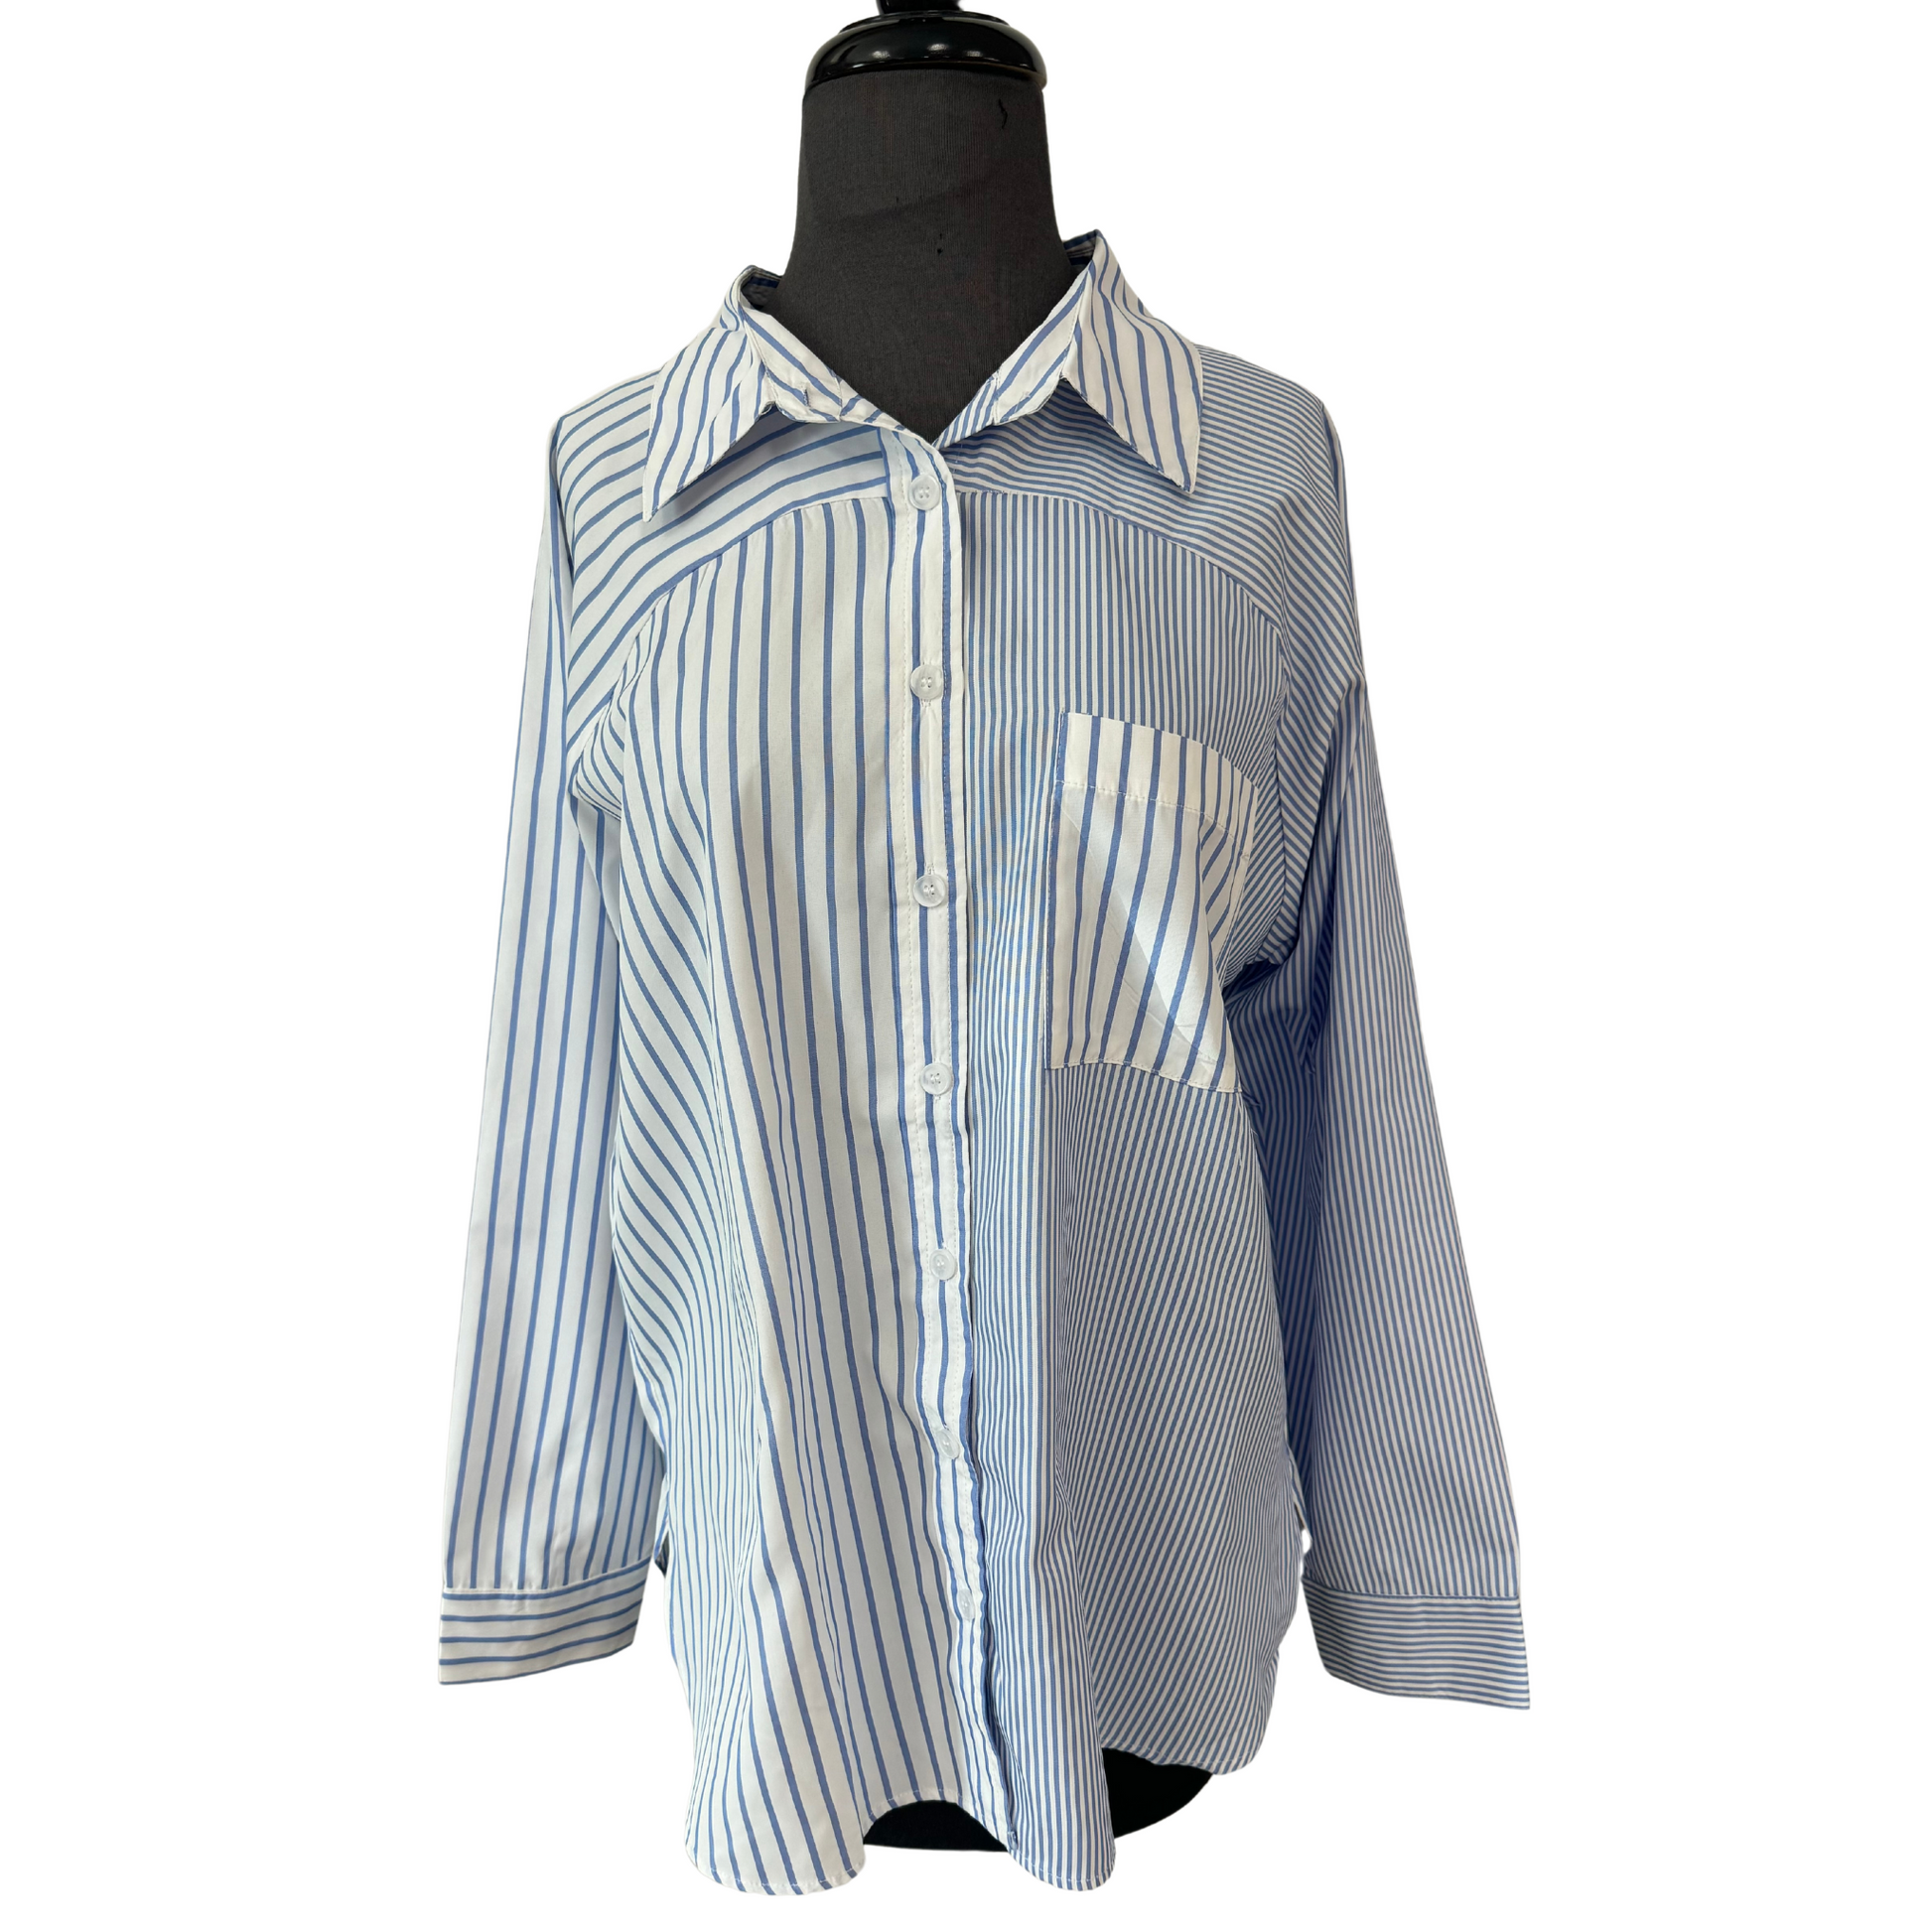 Experience both style and versatility with our Mix Print Button Up Top. This top features a bold blue and white stripe design, along with a mix print that adds a unique touch. The collared neckline and button up front offer a polished look, while the pocket adds functionality. Elevate your wardrobe with this must-have top.